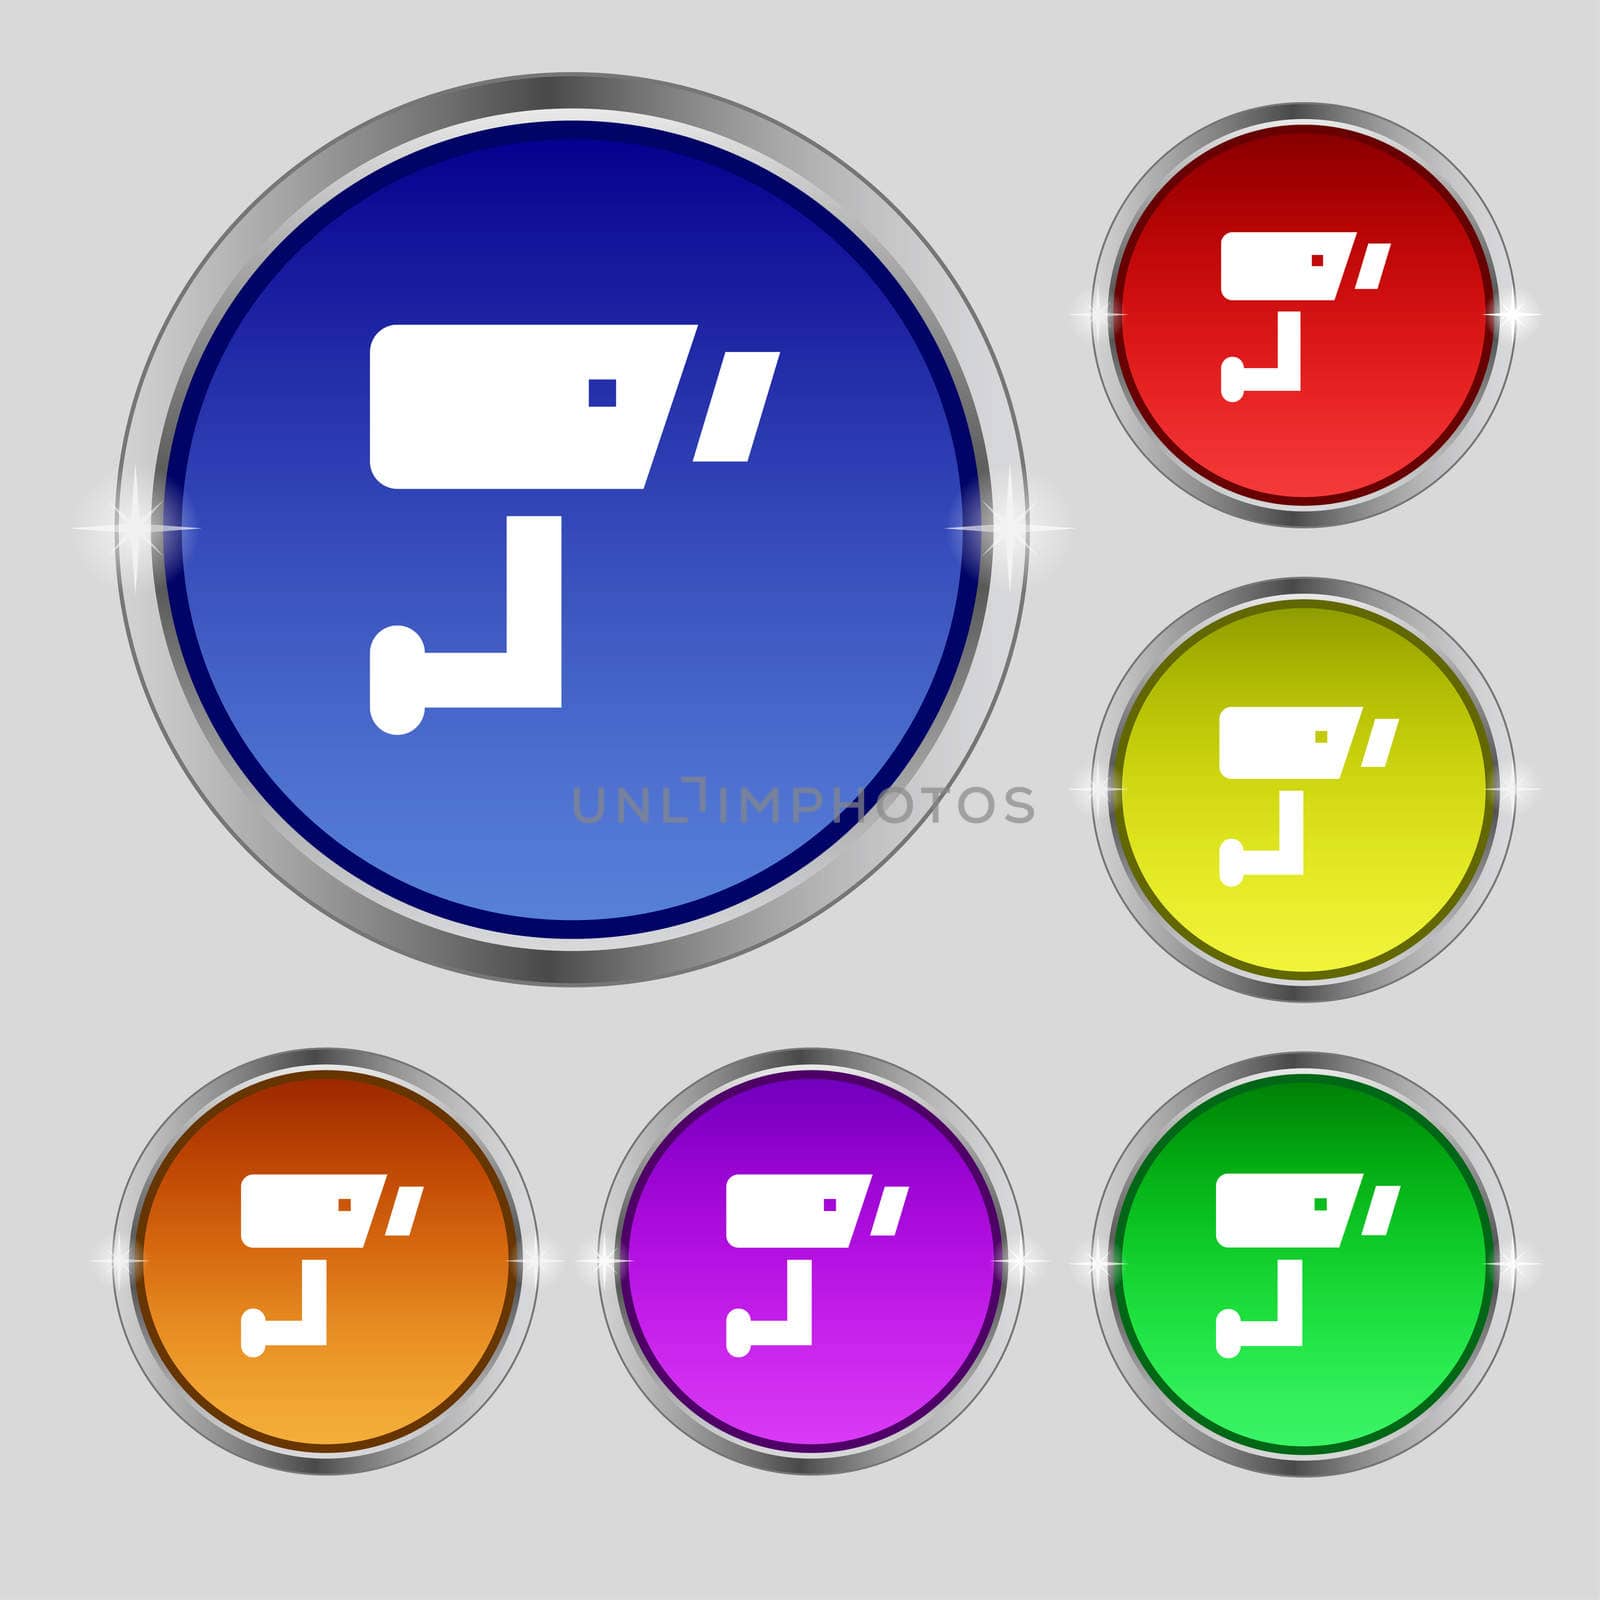 Surveillance Camera icon sign. Round symbol on bright colourful buttons. illustration